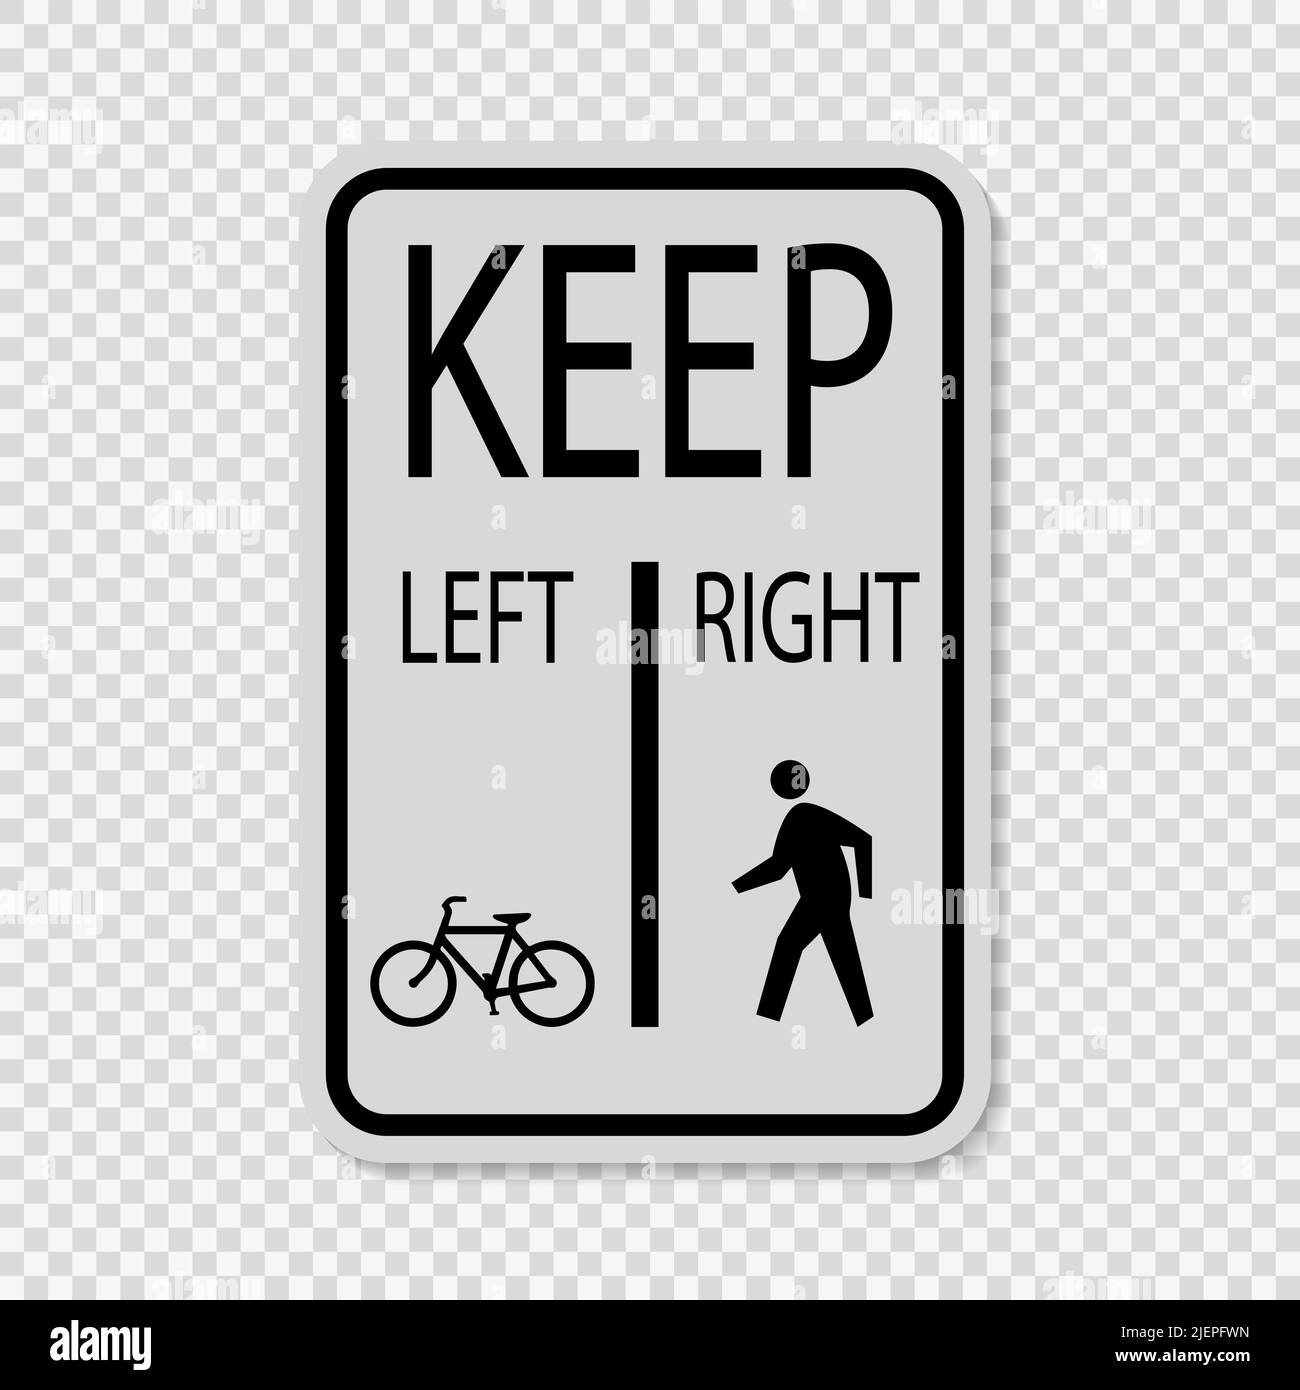 Bicycles Keep Left Pedestrians Keep Right Sign on transparent background,vector illustration Stock Vector